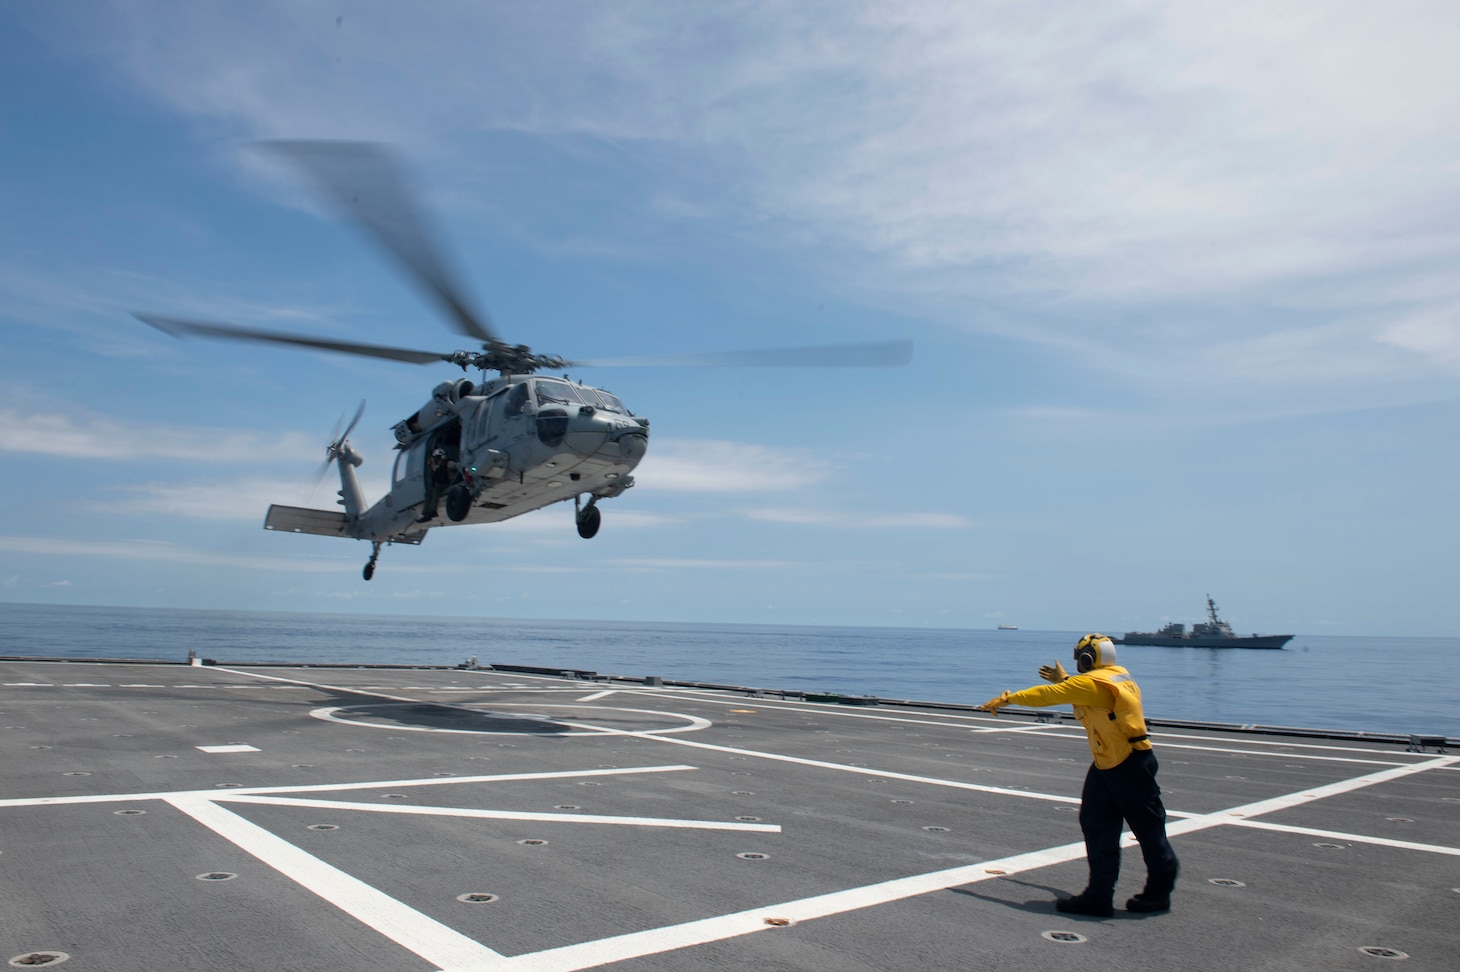 SOUTH CHINA SEA (July 9, 2021) Sailors assigned to the independence-variant littoral combat ship USS Tulsa (LCS 16) and Helicopter Sea Combat Squadron 21 (HSC 21) conduct flight operations while sailing with the Arleigh Burke-class guided missile destroyer USS Kidd (DDG 100), July 9. Tulsa, part of Destroyer Squadron Seven, is on a rotational deployment, operating in the U.S. 7th Fleet area of operations to enhance interoperability with partners and serve as a ready-response force in support of a free and open Indo-Pacific region. (U.S. Navy photo by Mass Communication Specialist 3rd Class Chase Stephens)